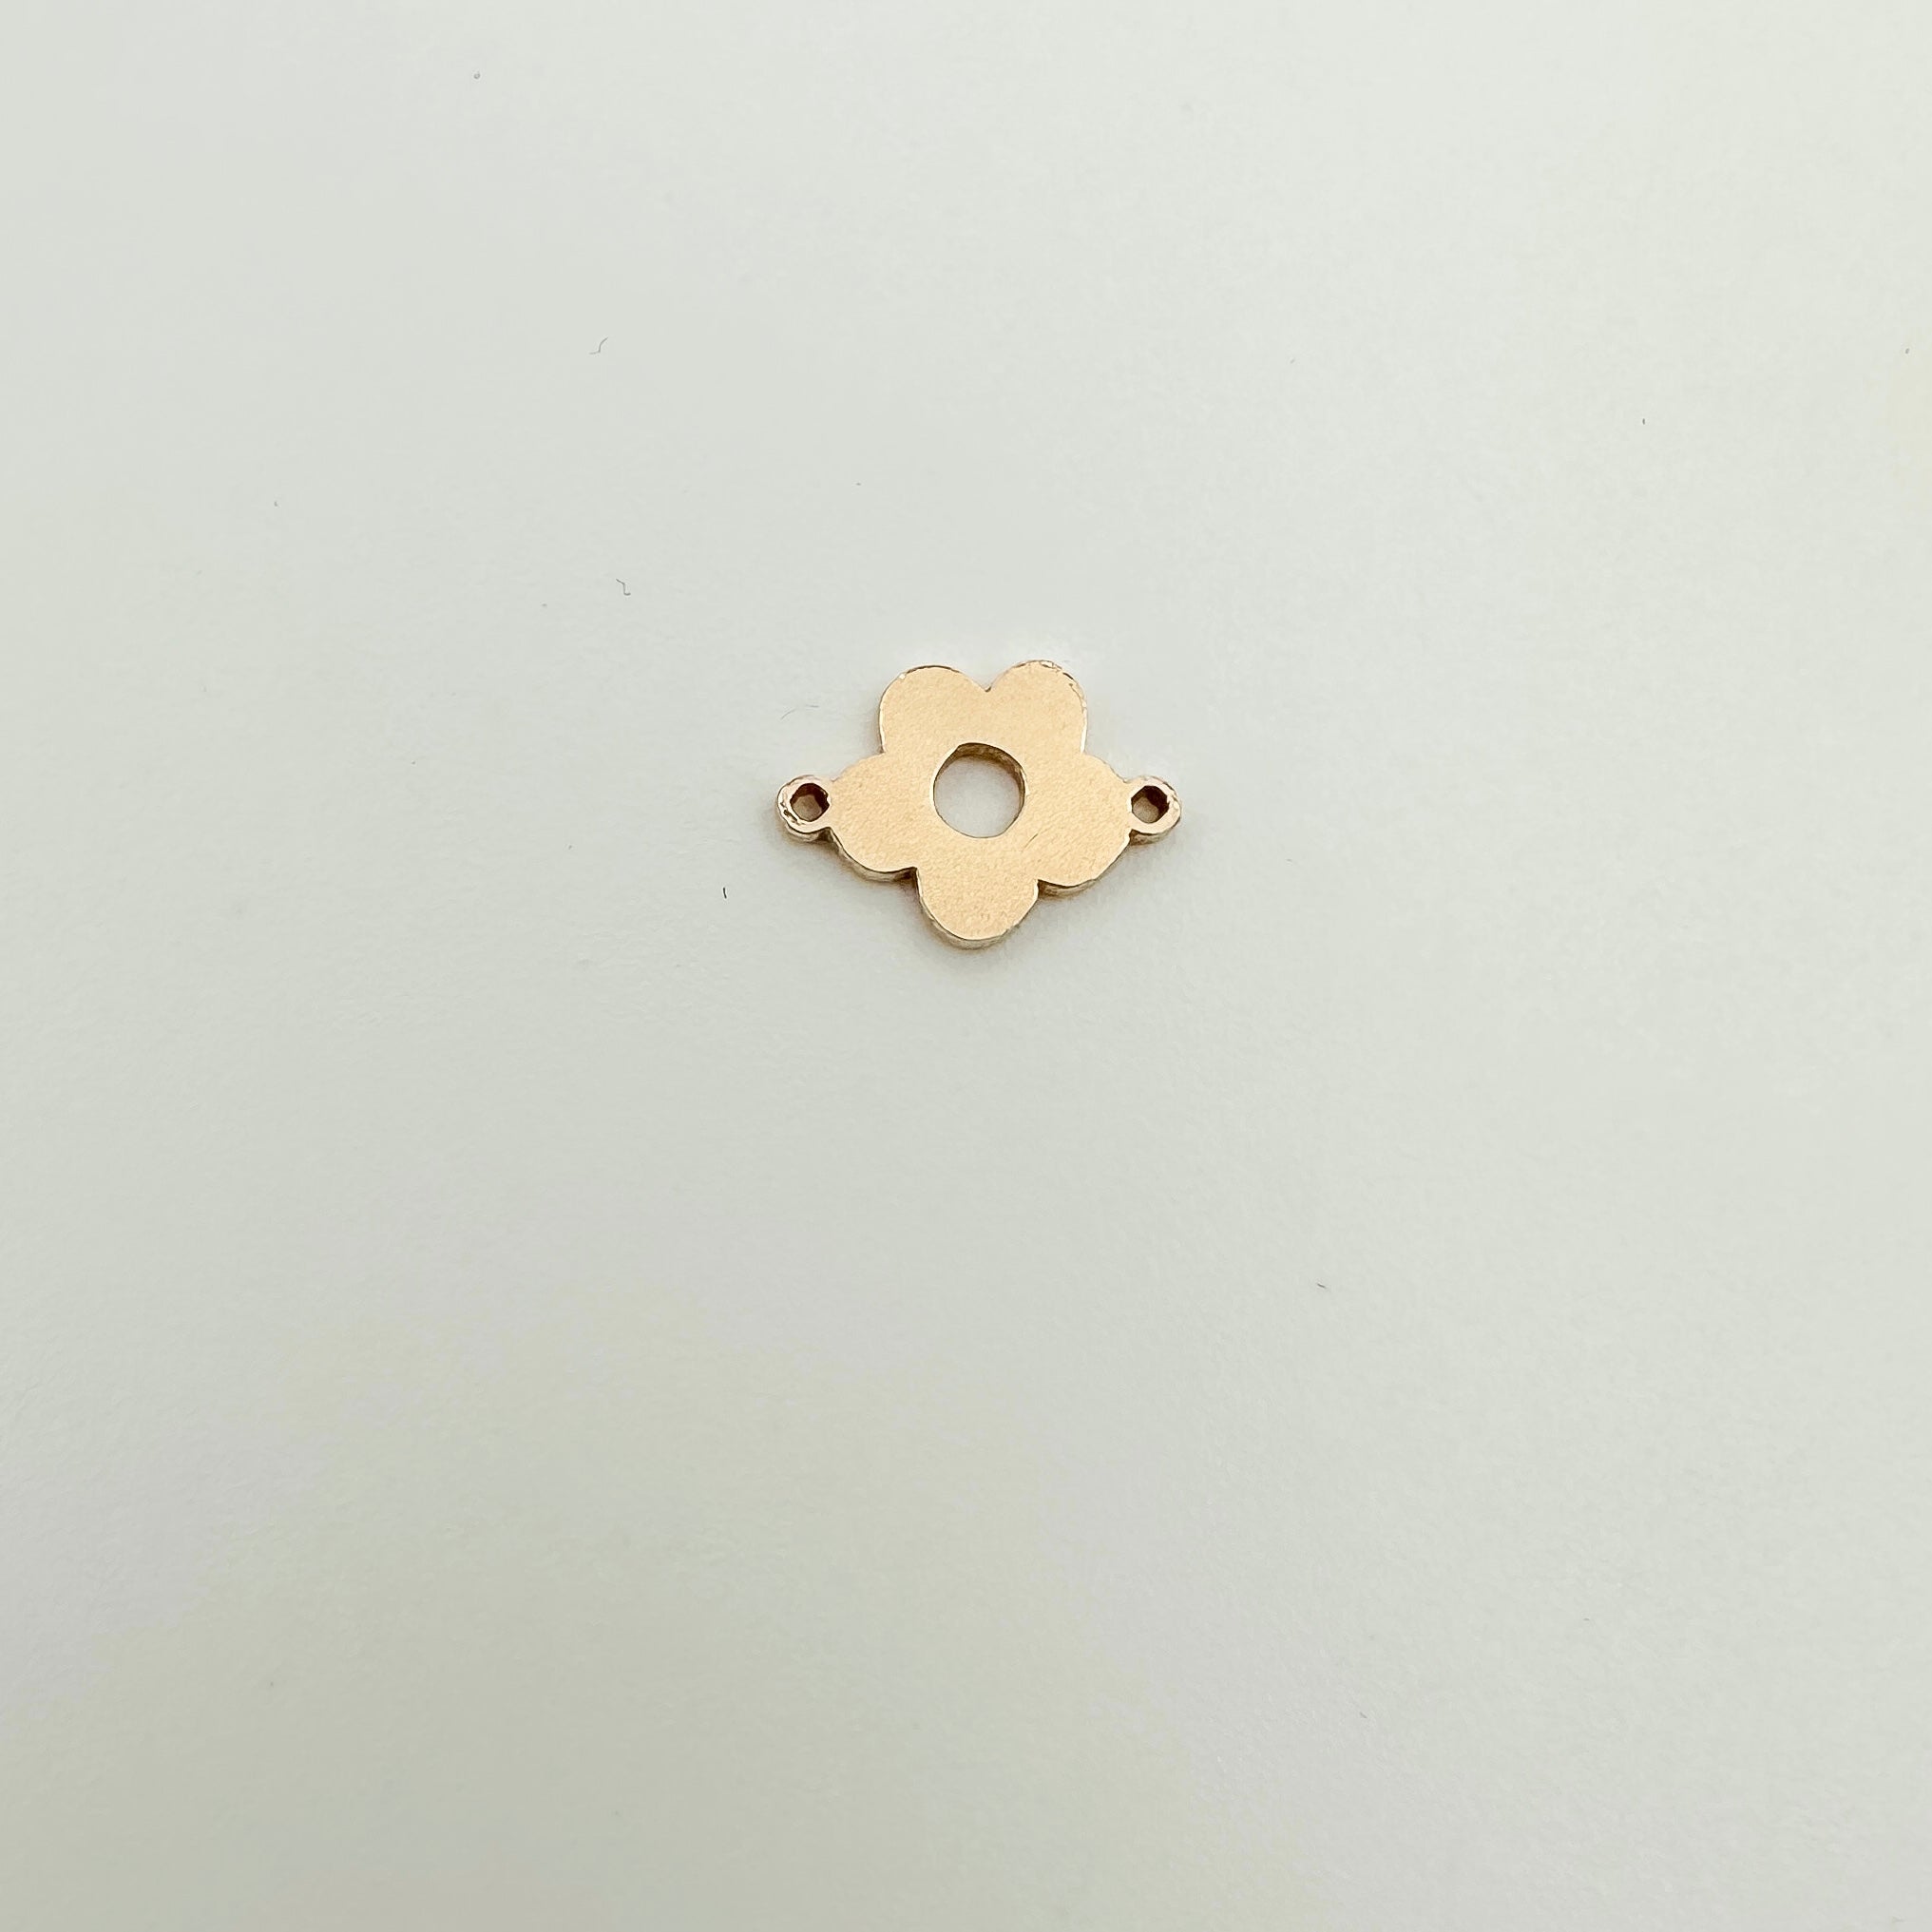 gold filled flower connector, gold filled daisy connector, gold filled connectors, permanent jewelry connectors, flower connector, essbe jewelry supply